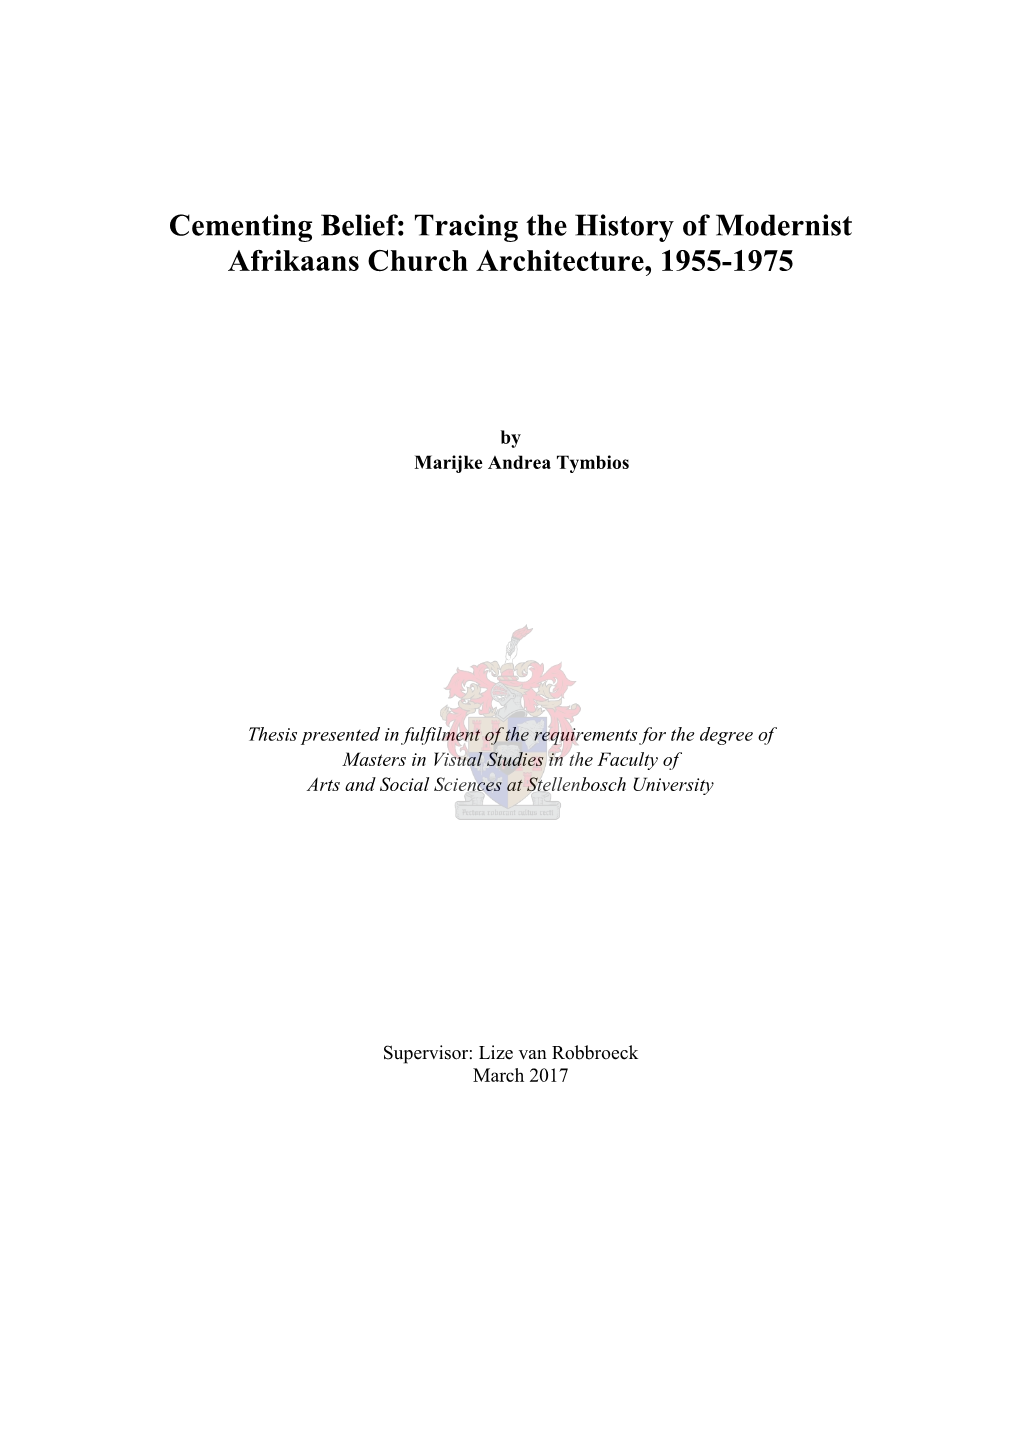 Cementing Belief: Tracing the History of Modernist Afrikaans Church Architecture, 1955-1975